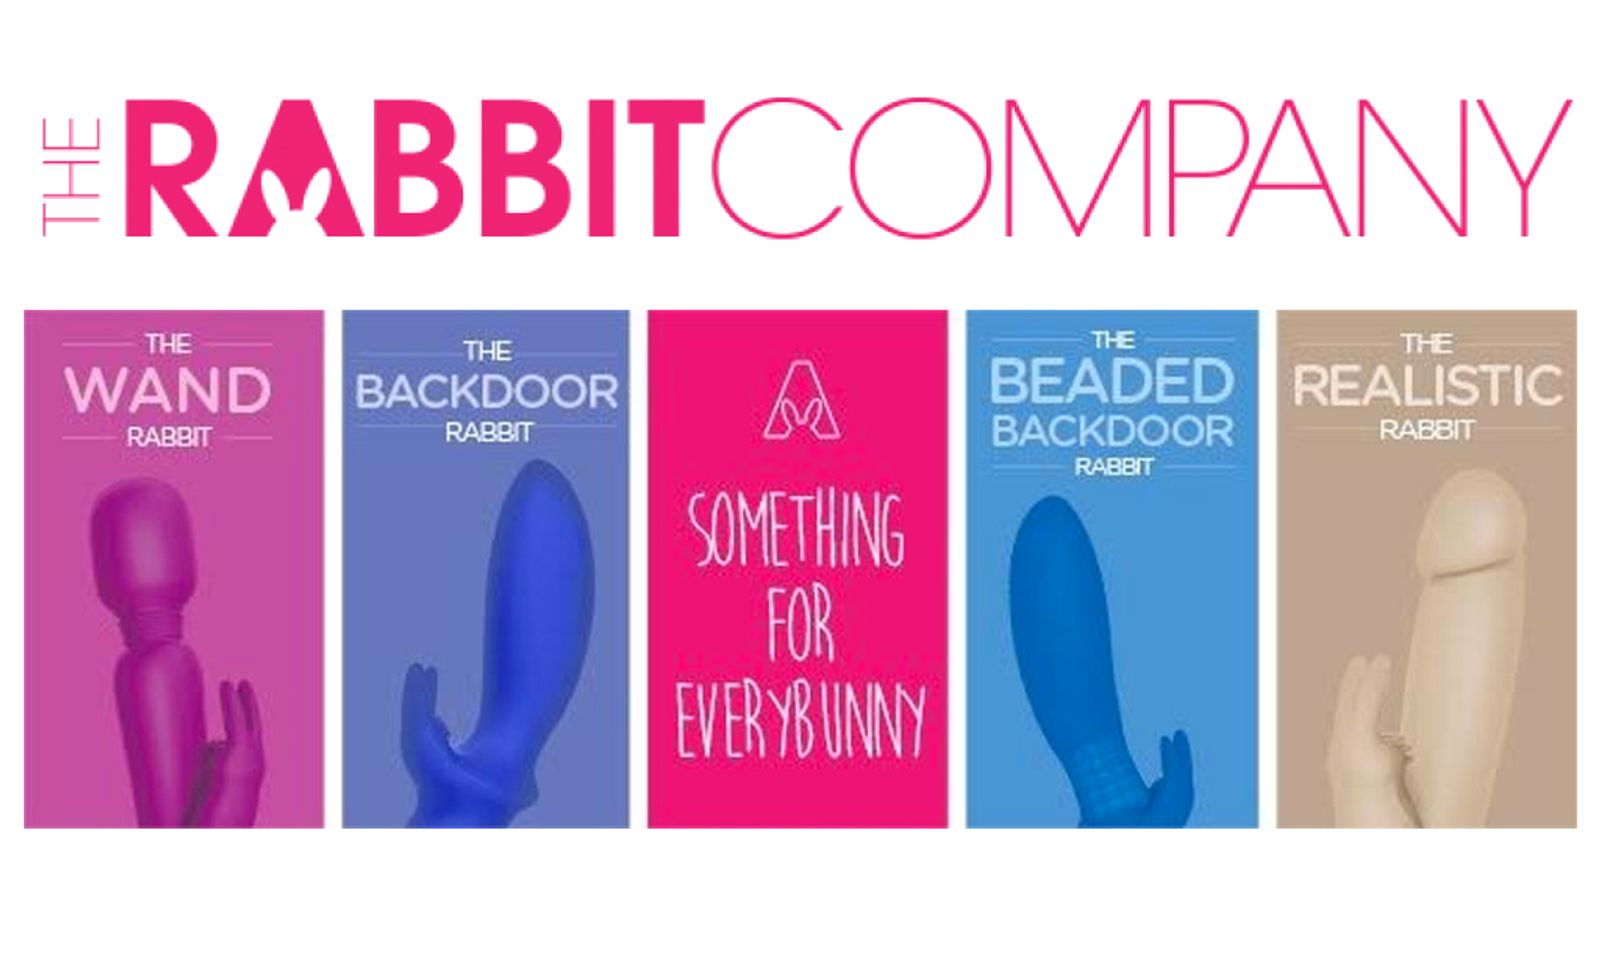 The Rabbit Company Fires Up Four New Models